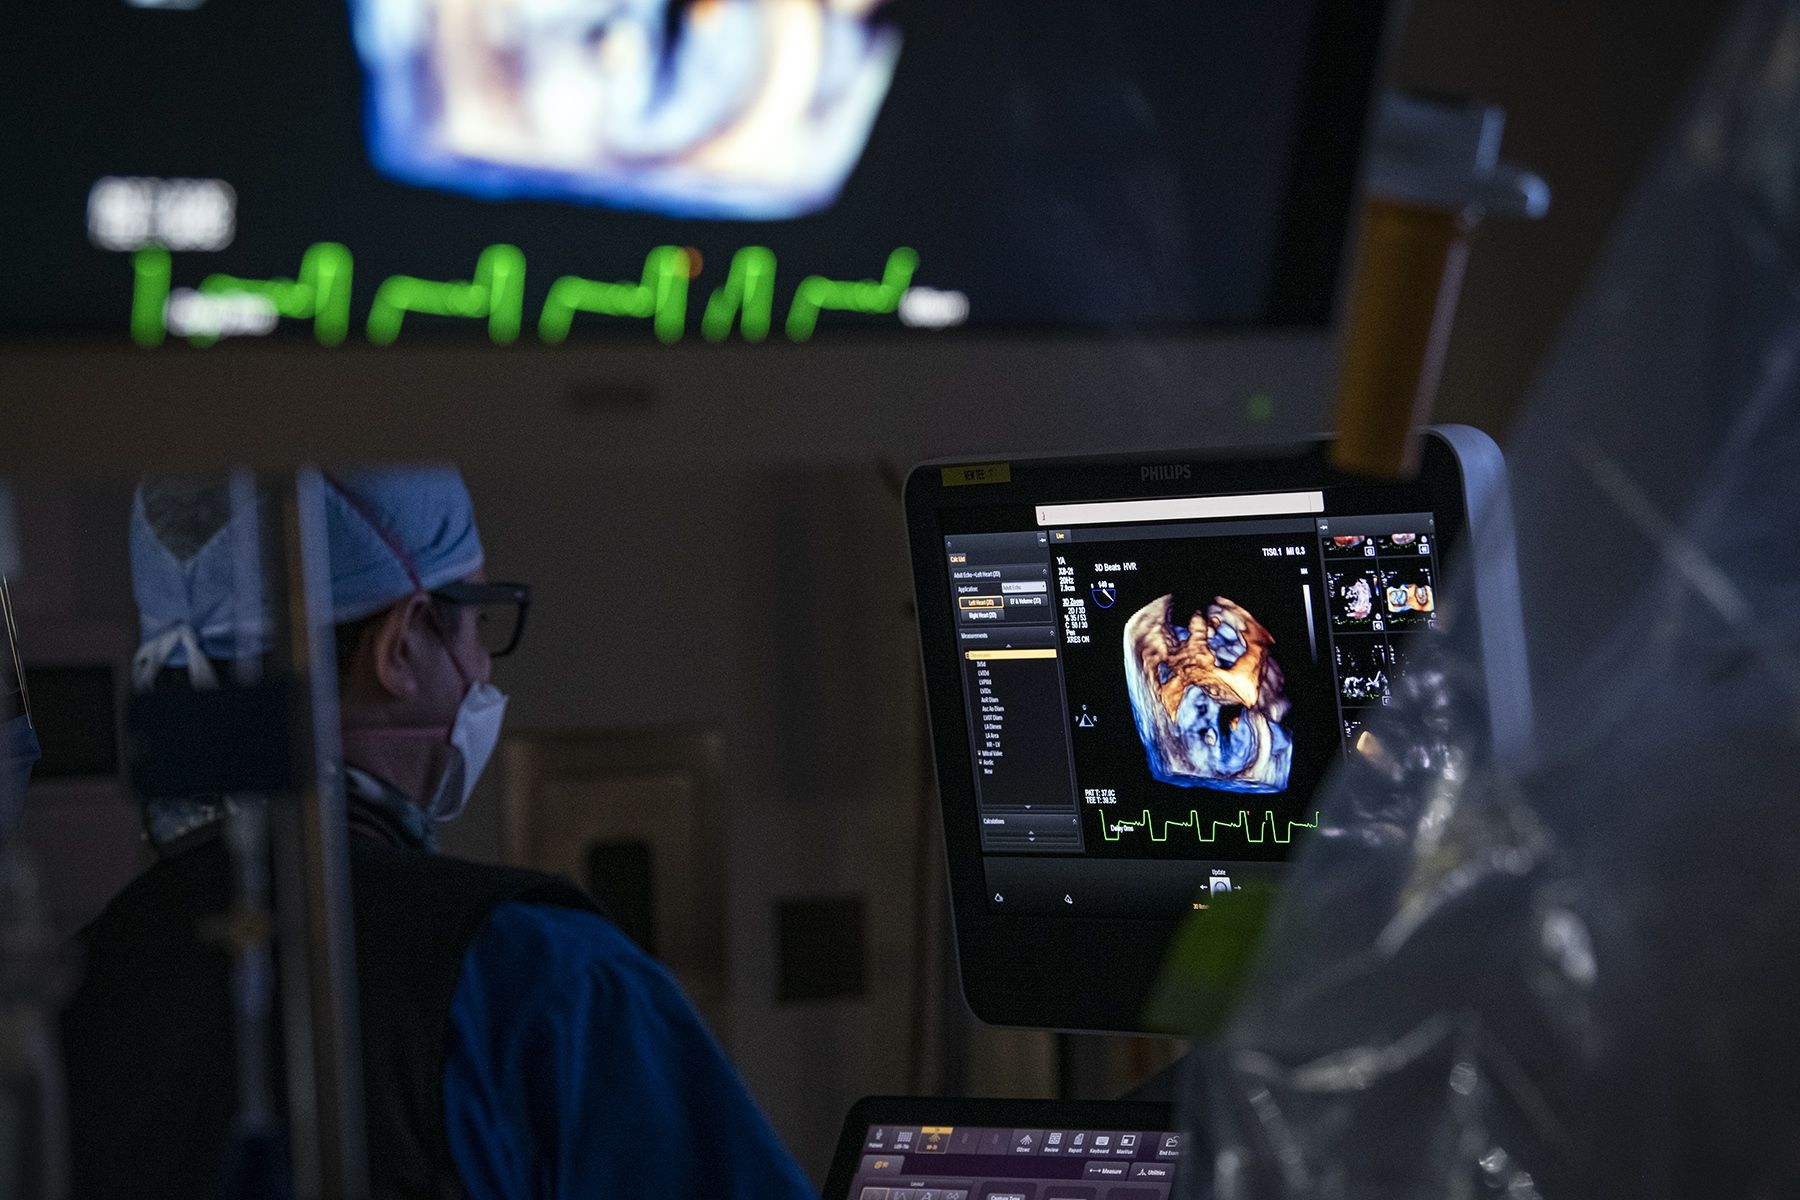 State-of-the-art imaging technology helps the surgical team implant the clip in the patient's heart